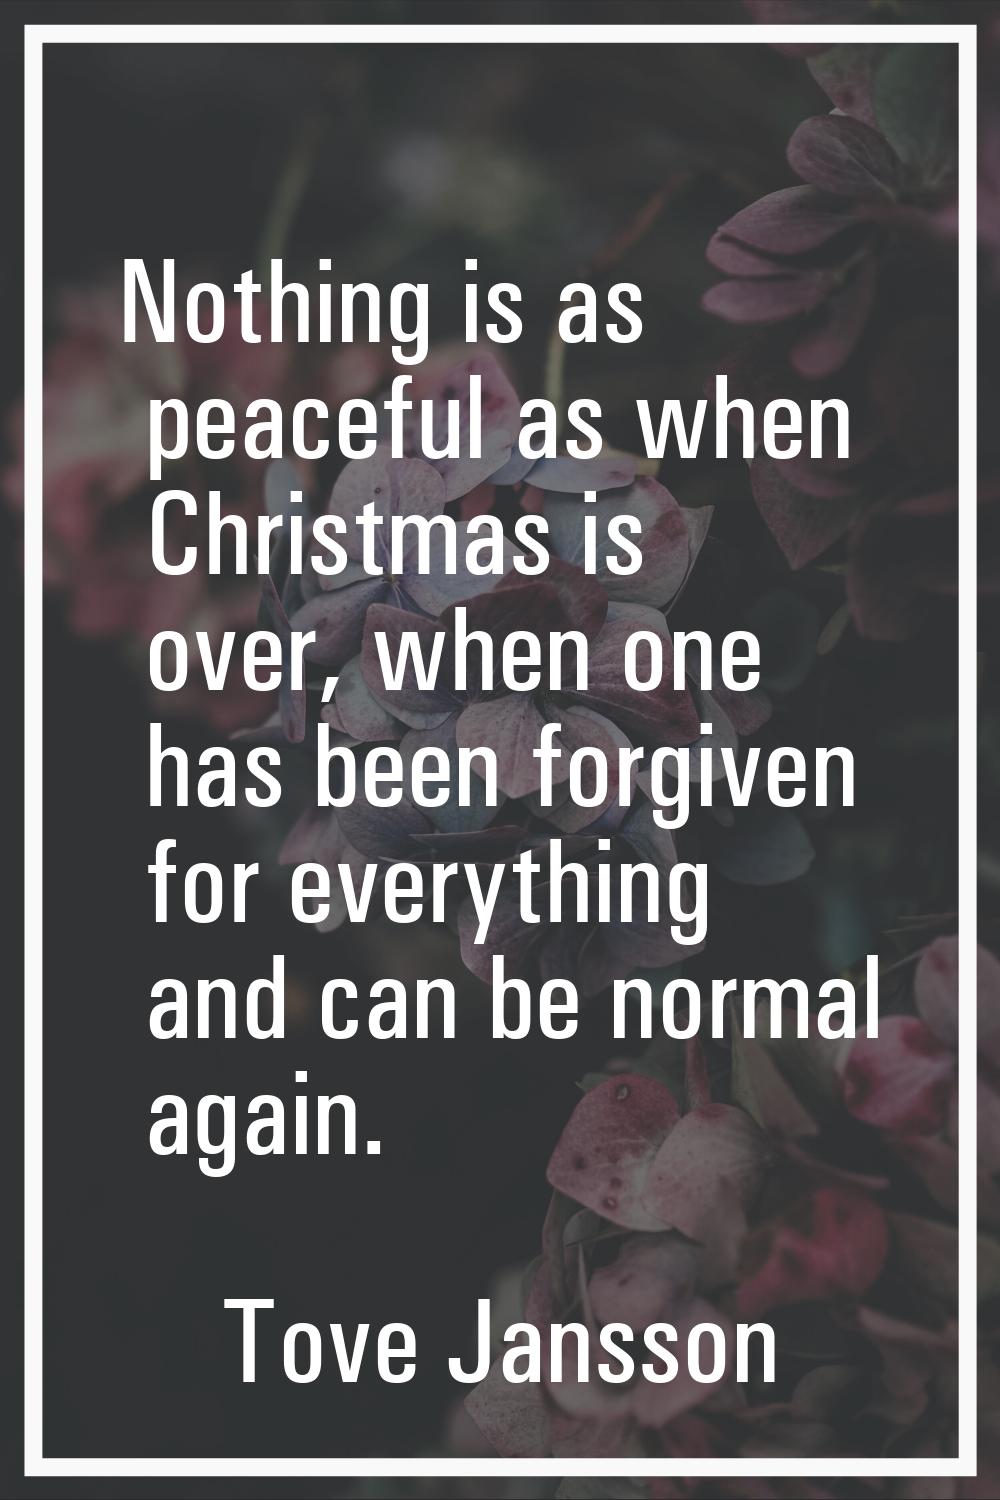 Nothing is as peaceful as when Christmas is over, when one has been forgiven for everything and can